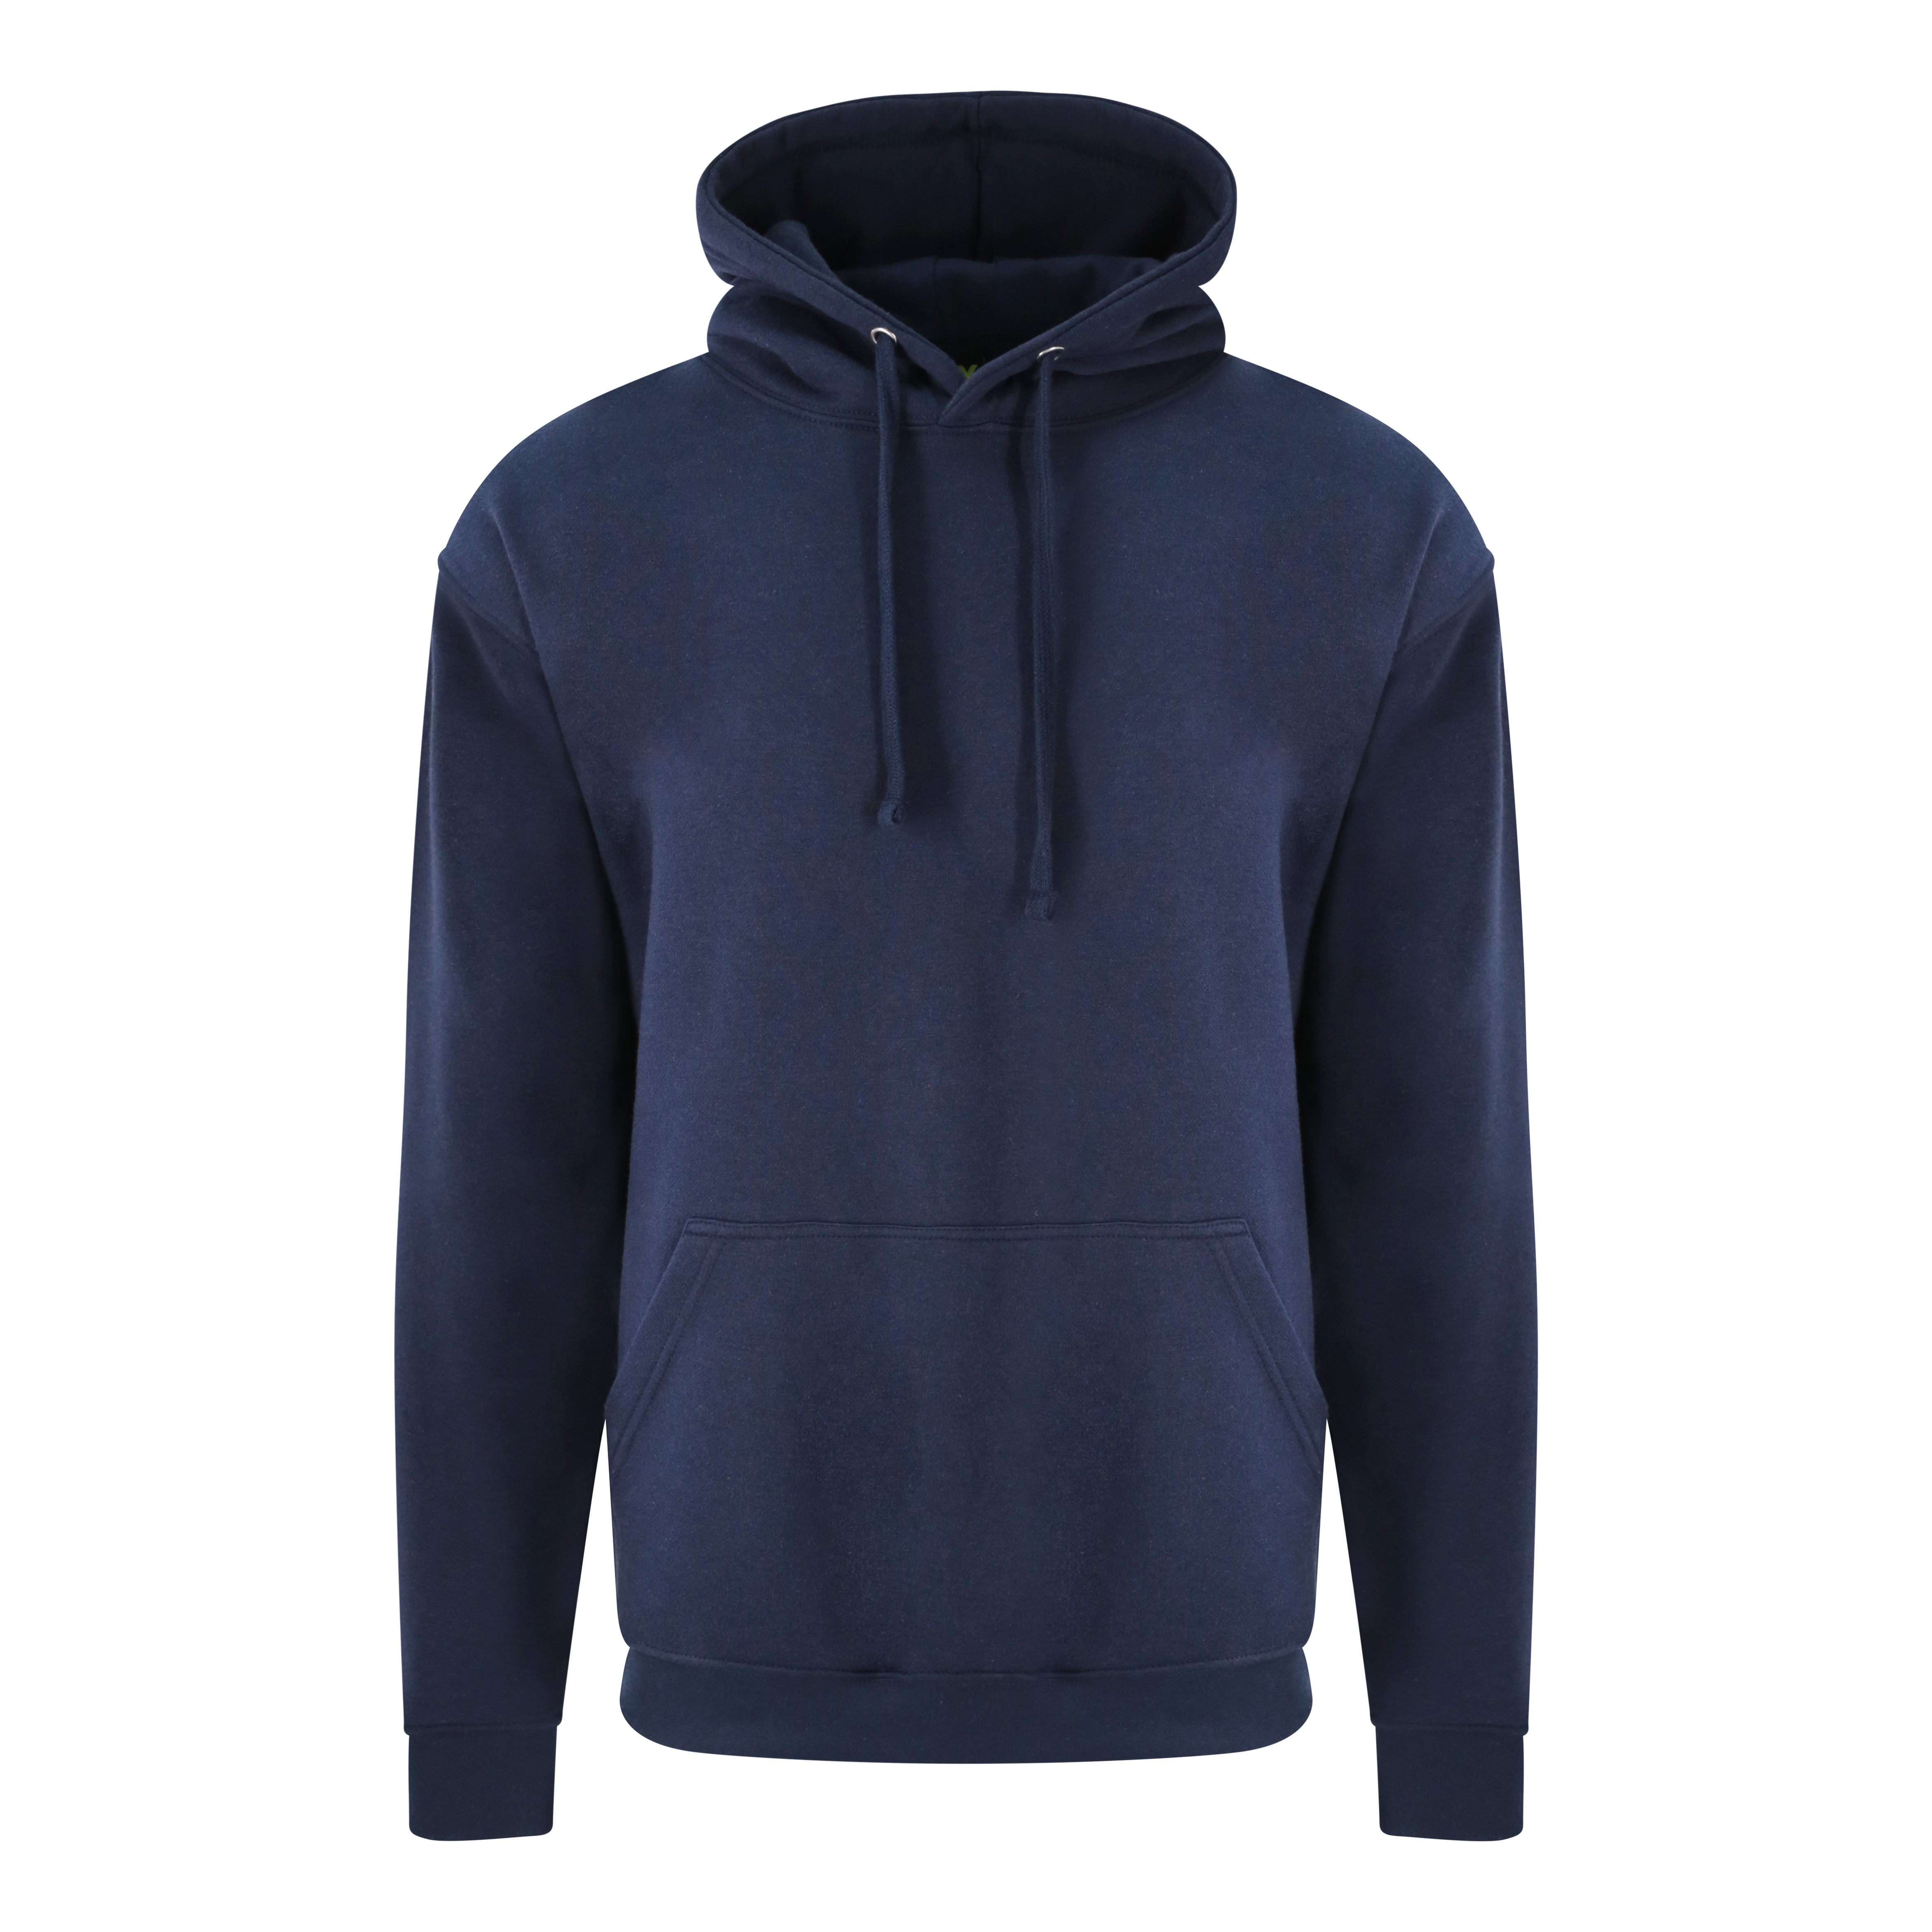 ax-httpswebsystems.s3.amazonaws.comtmp_for_downloadpro-rtx-pro-hoodie-navy.jpg